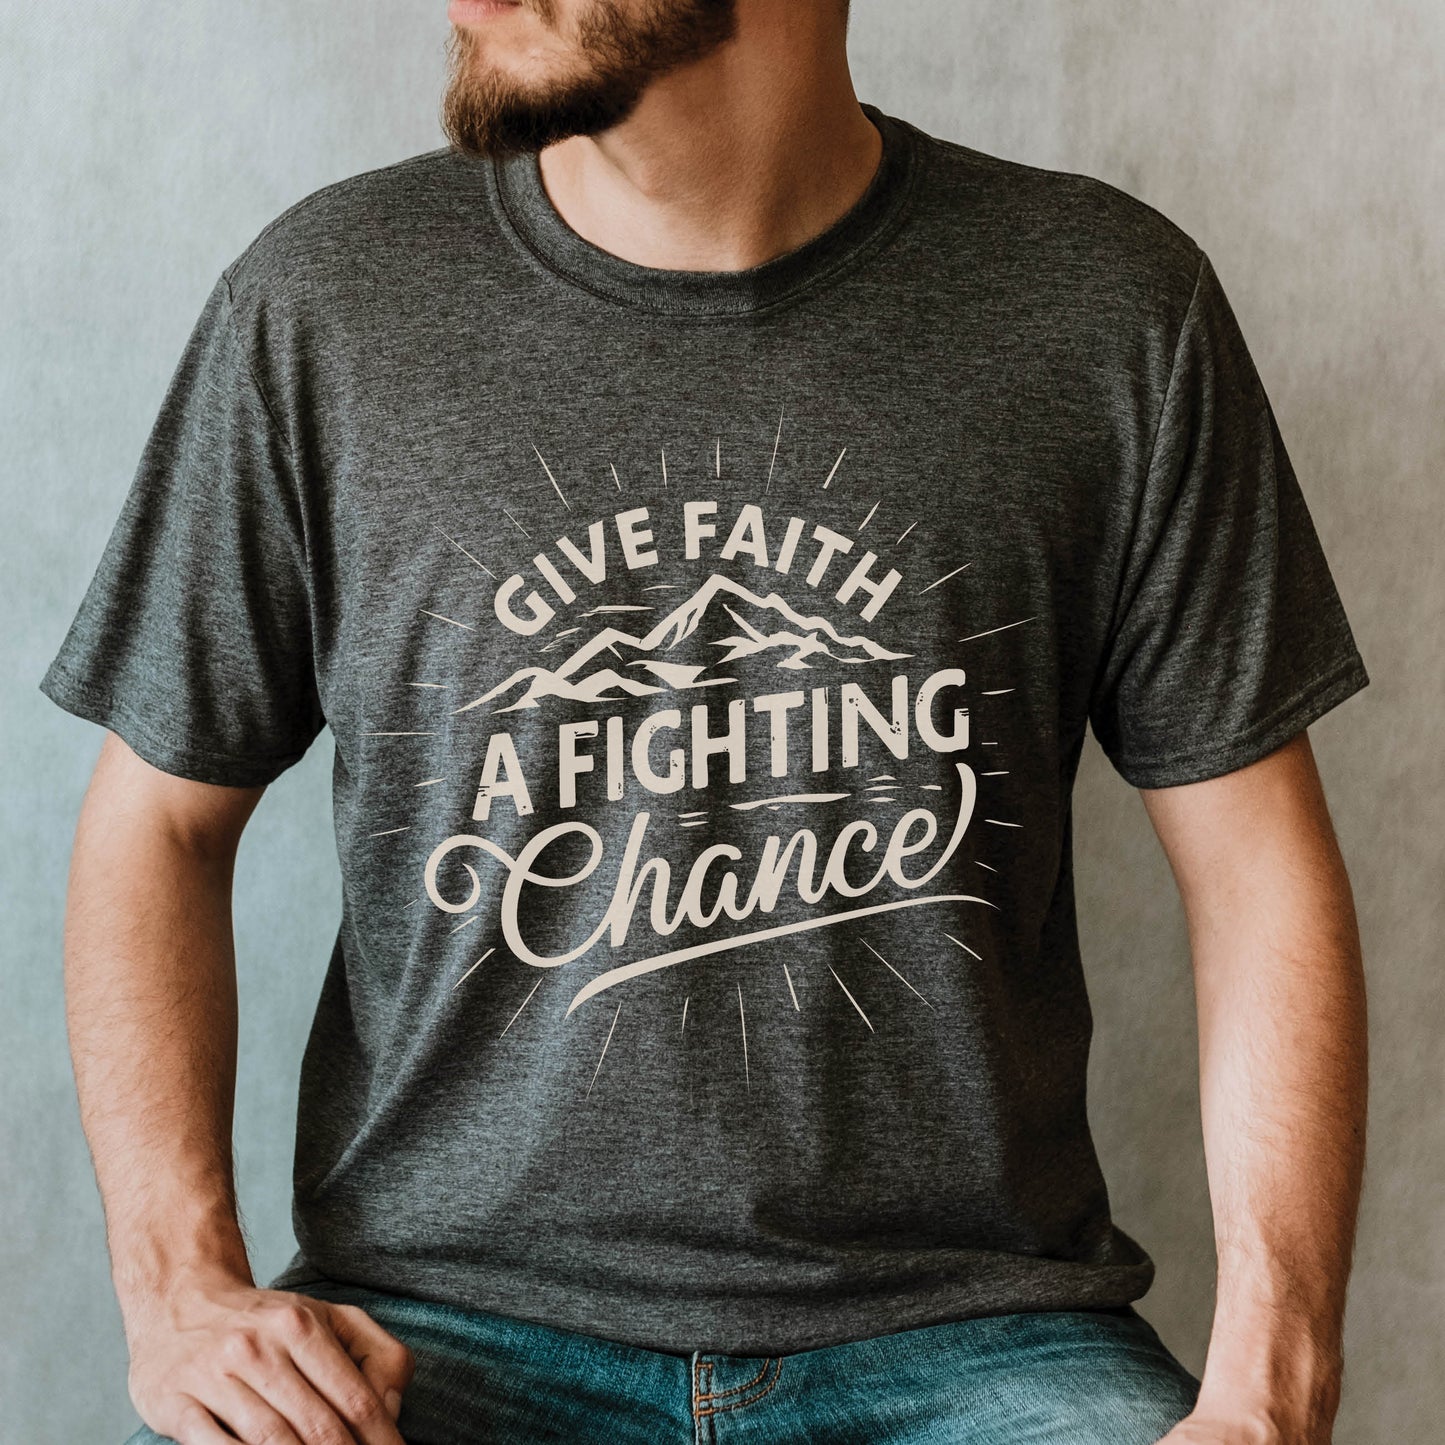 Bearded Man wearing a Heather Dark Gray Unisex Tee with Christian Bible verse quote that says, "Give Faith A Fighting Chance" with retro sunburst and mountain graphics, designed for faith-based men and women